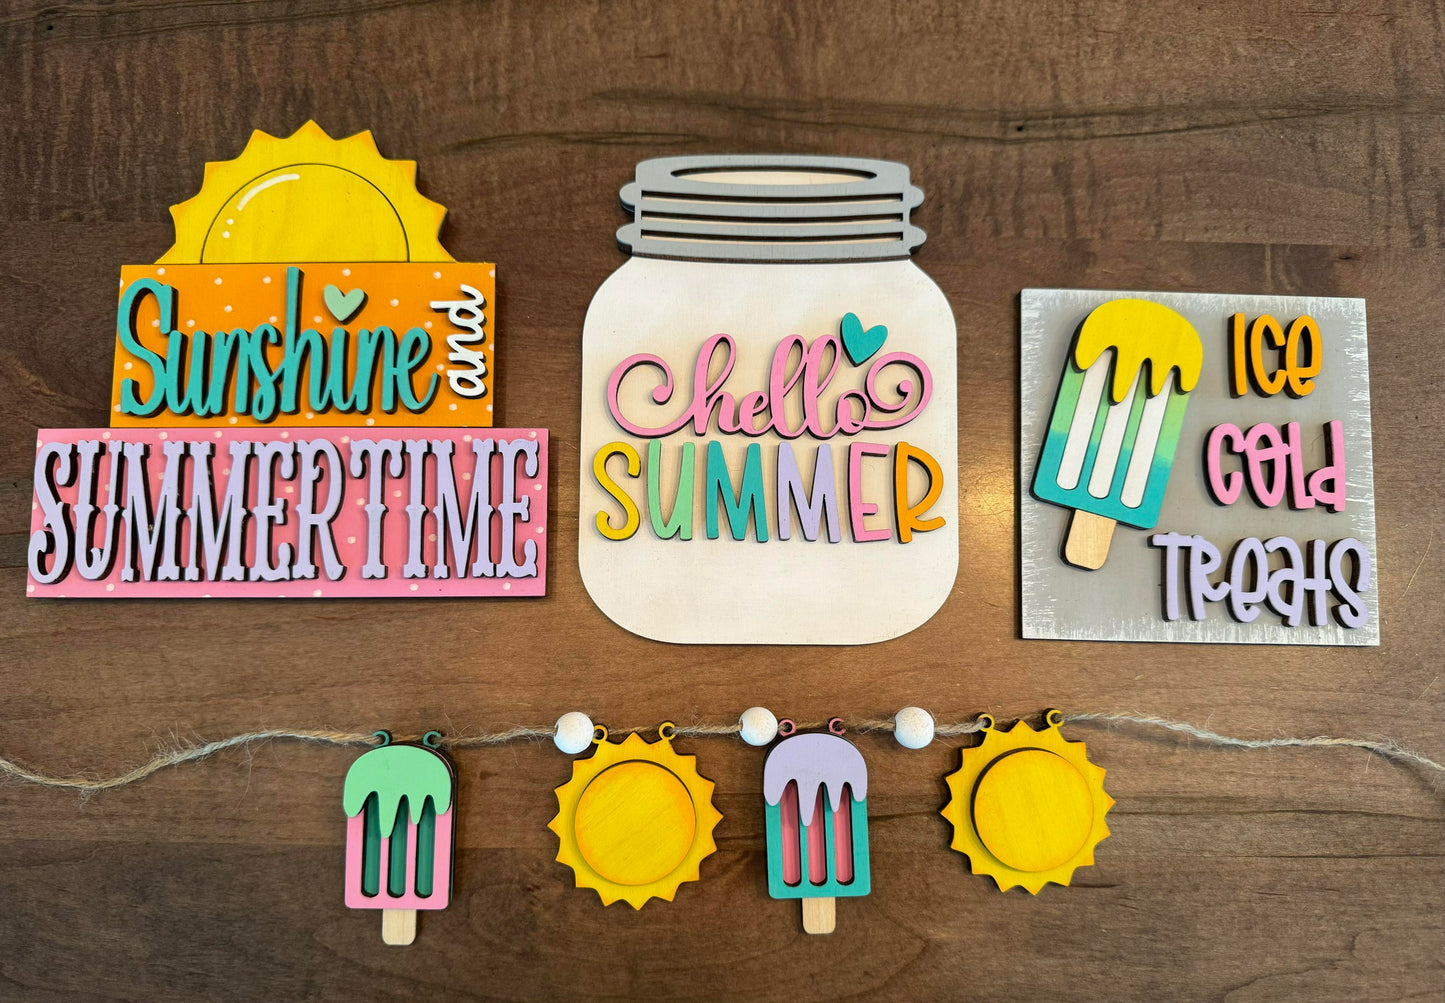 3D Tiered Tray Decor - Summer Popsicle